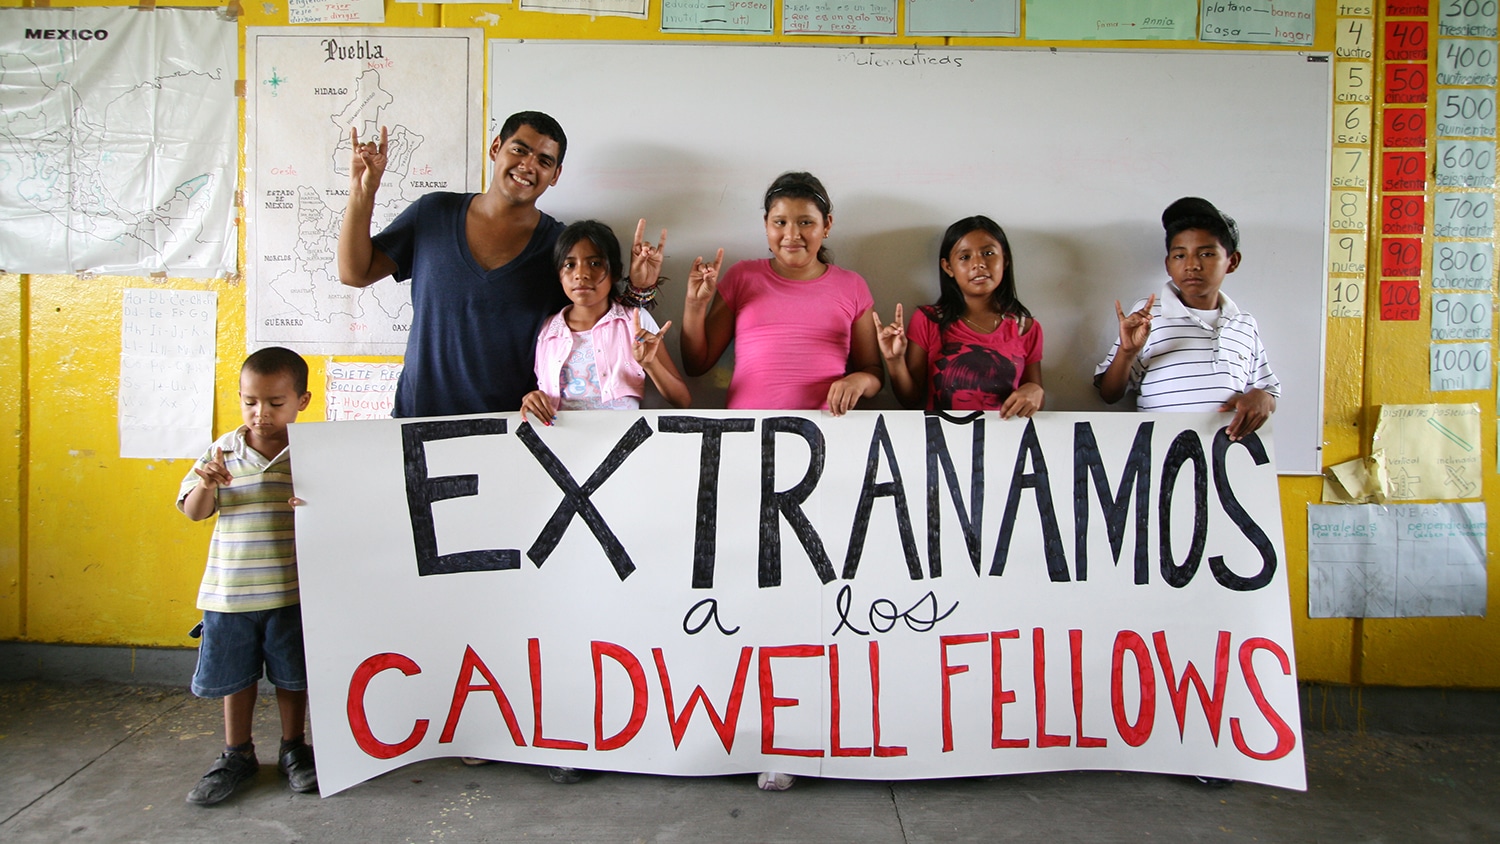 Saul Flores and children hold a banner thanking the Caldwell Fellows for their support.